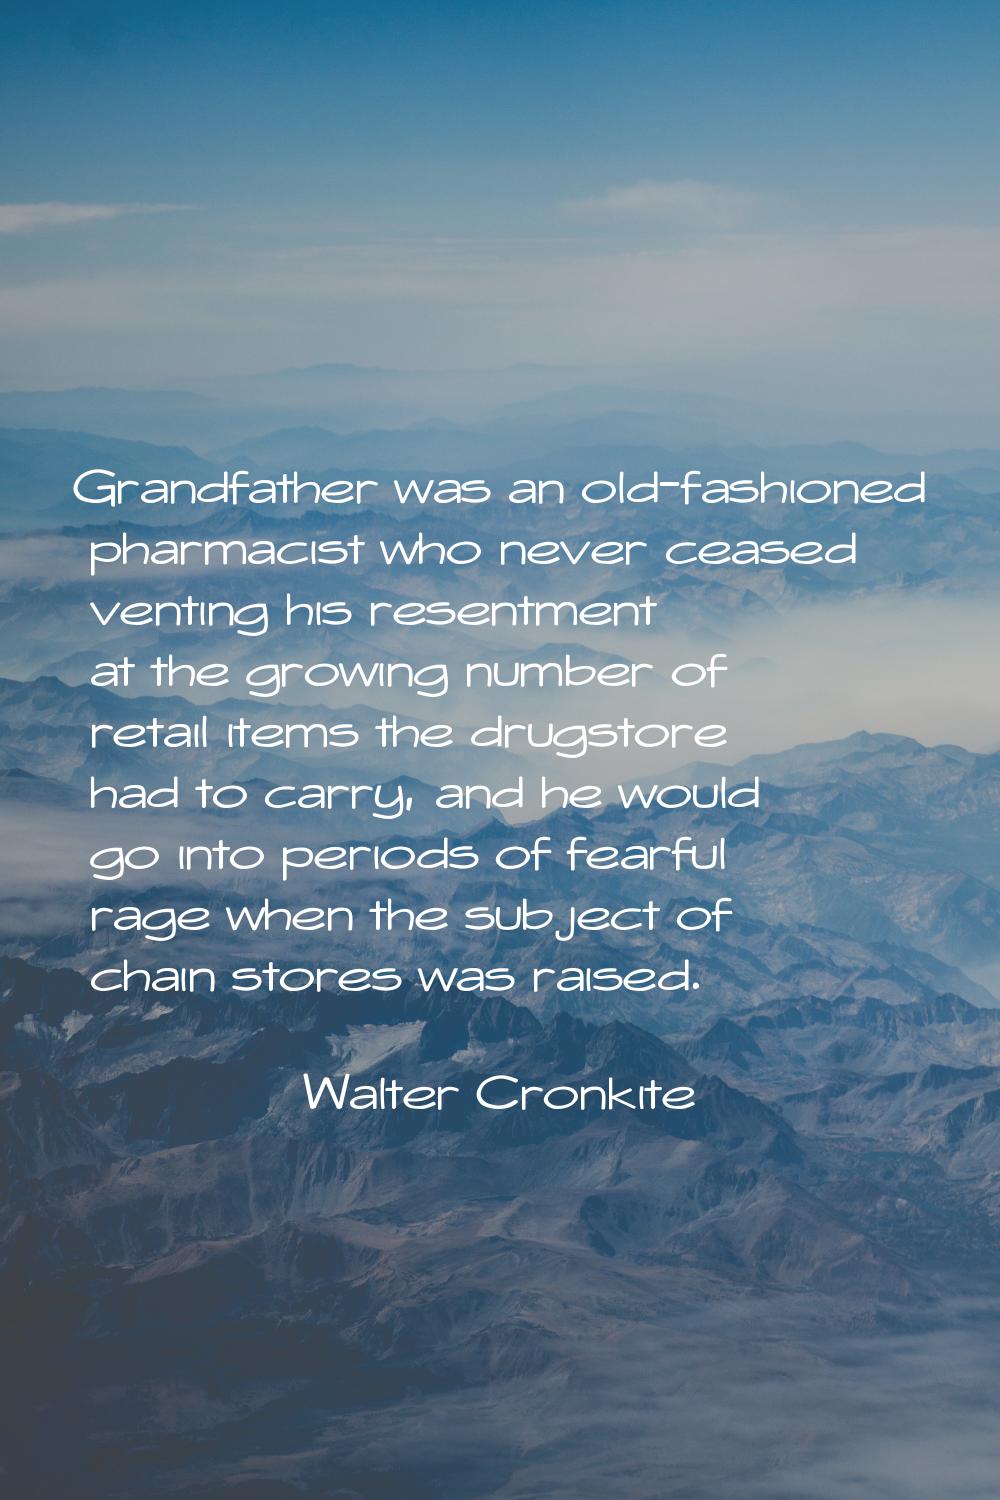 Grandfather was an old-fashioned pharmacist who never ceased venting his resentment at the growing 